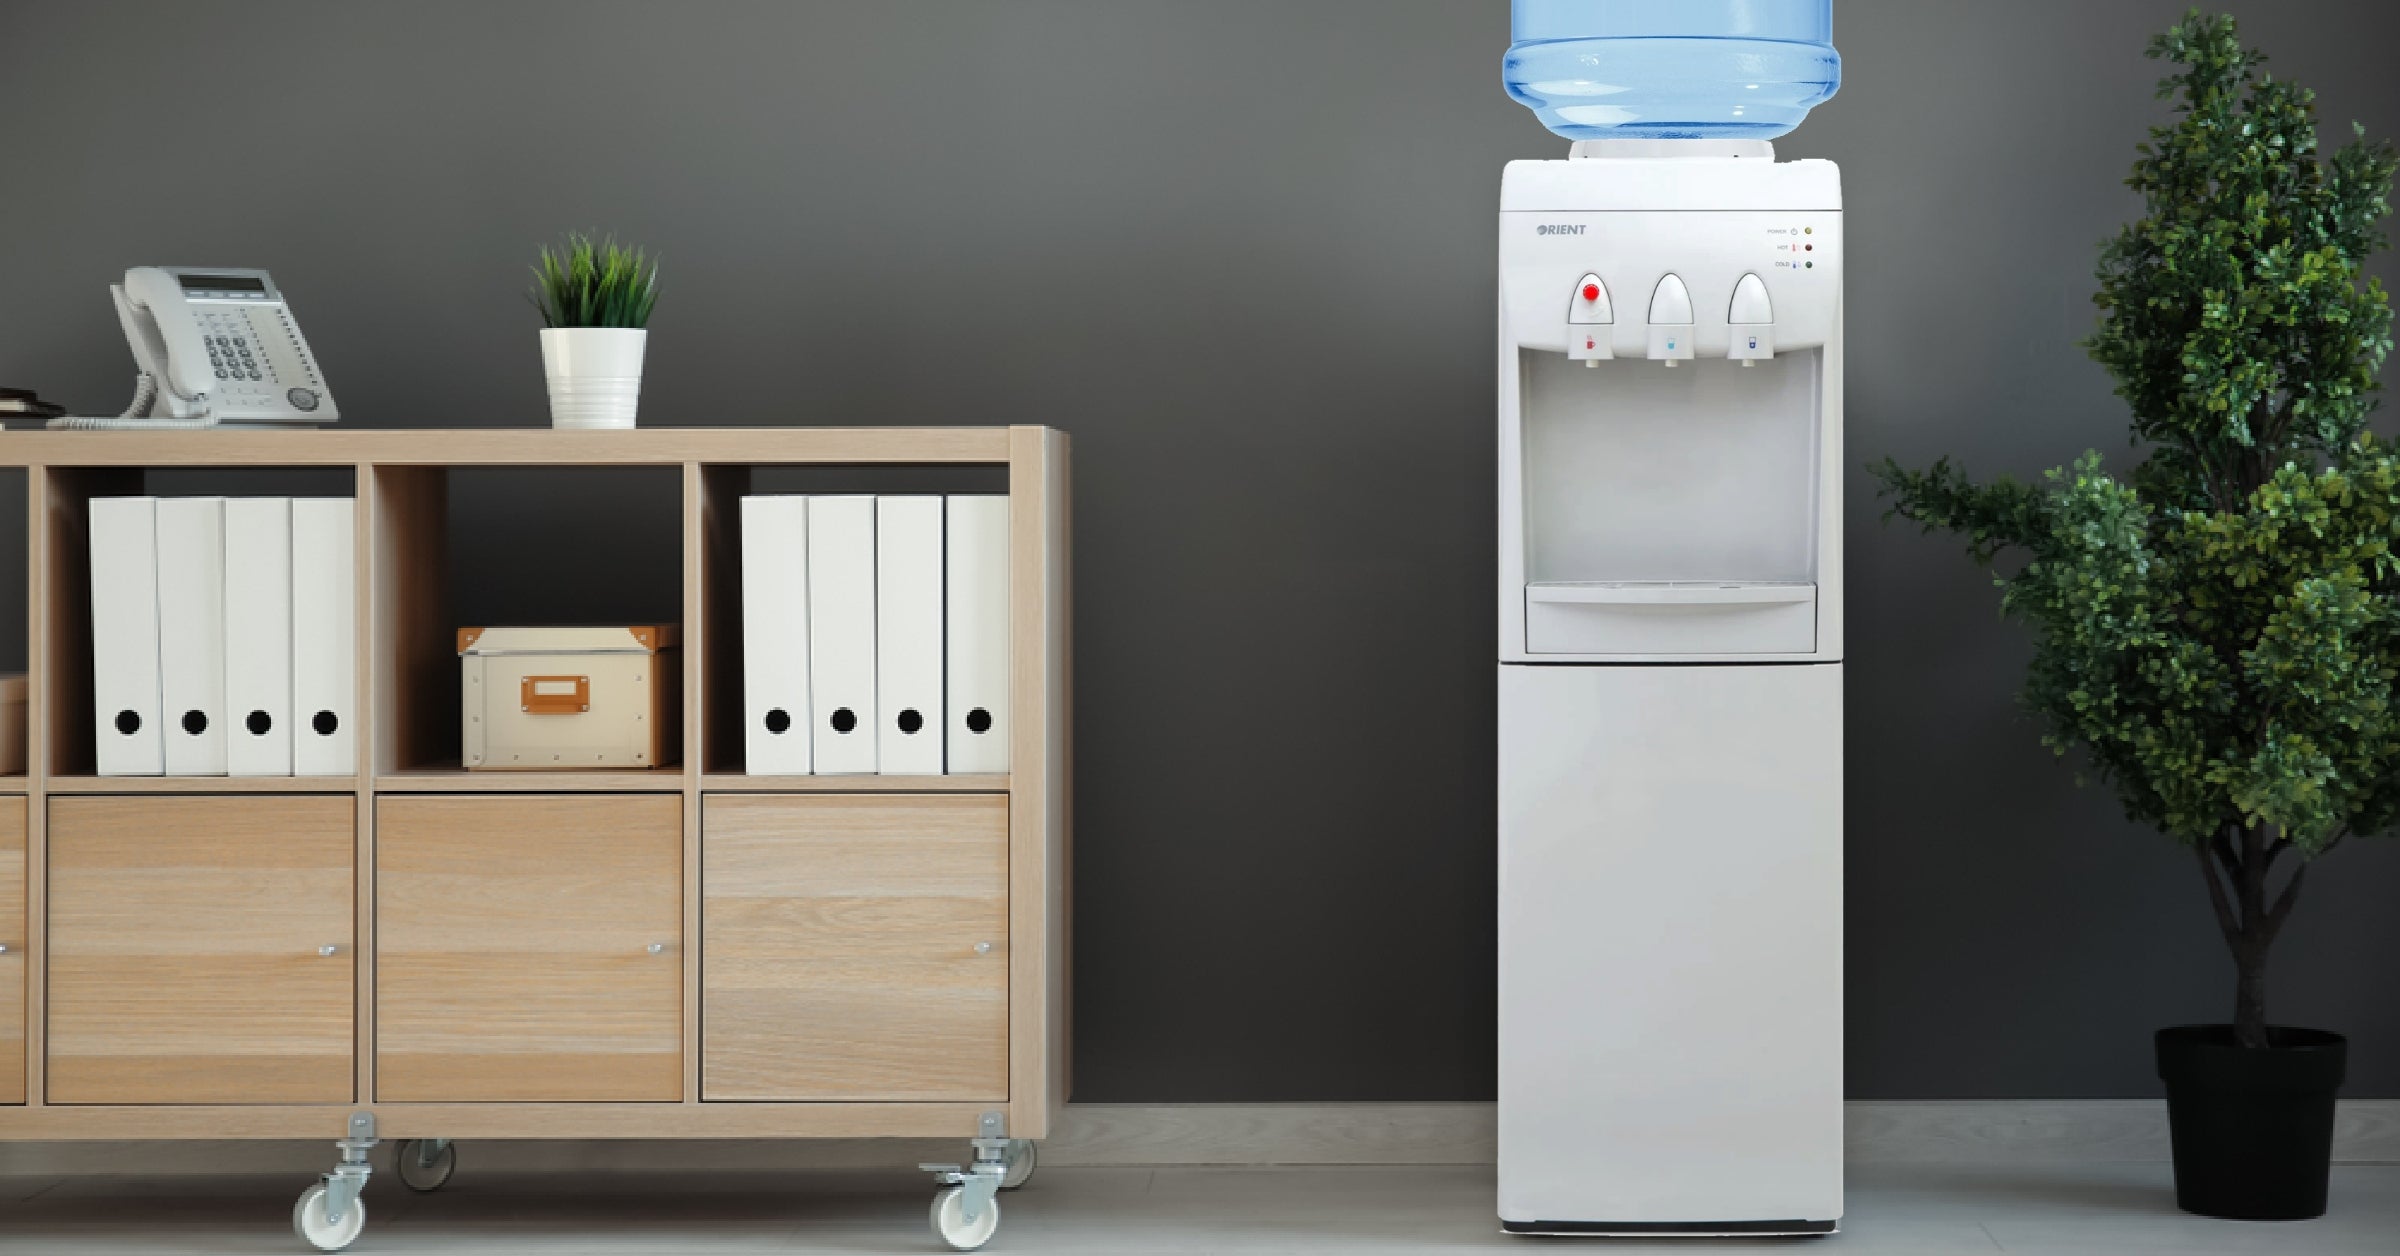 what are Benefits of Using a Water Dispenser ? Definitive Guide